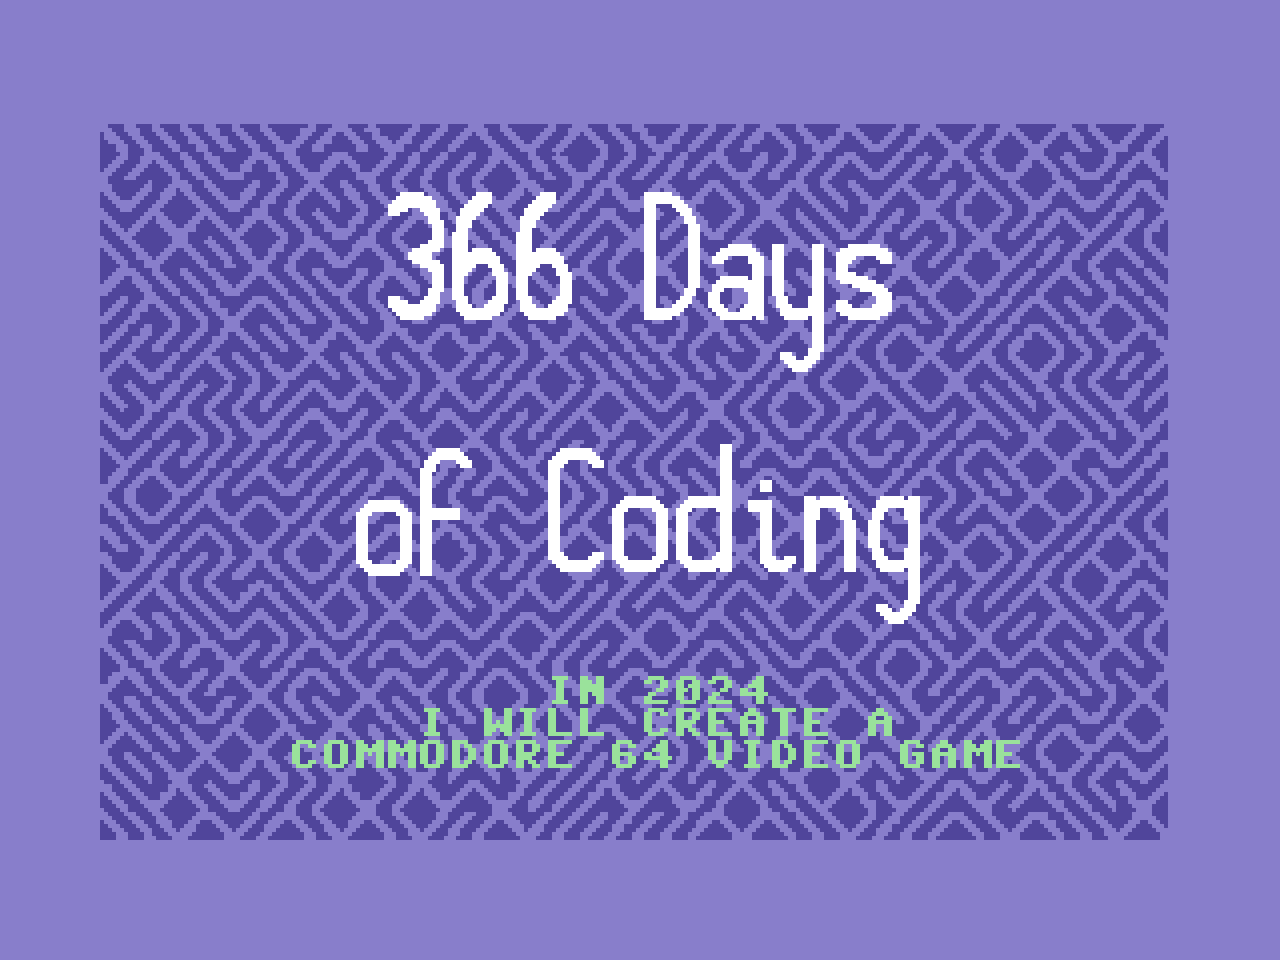 Commodore 64 screen drawing stating 366 days of code, in 2024 I will create a Commodore 64 video game